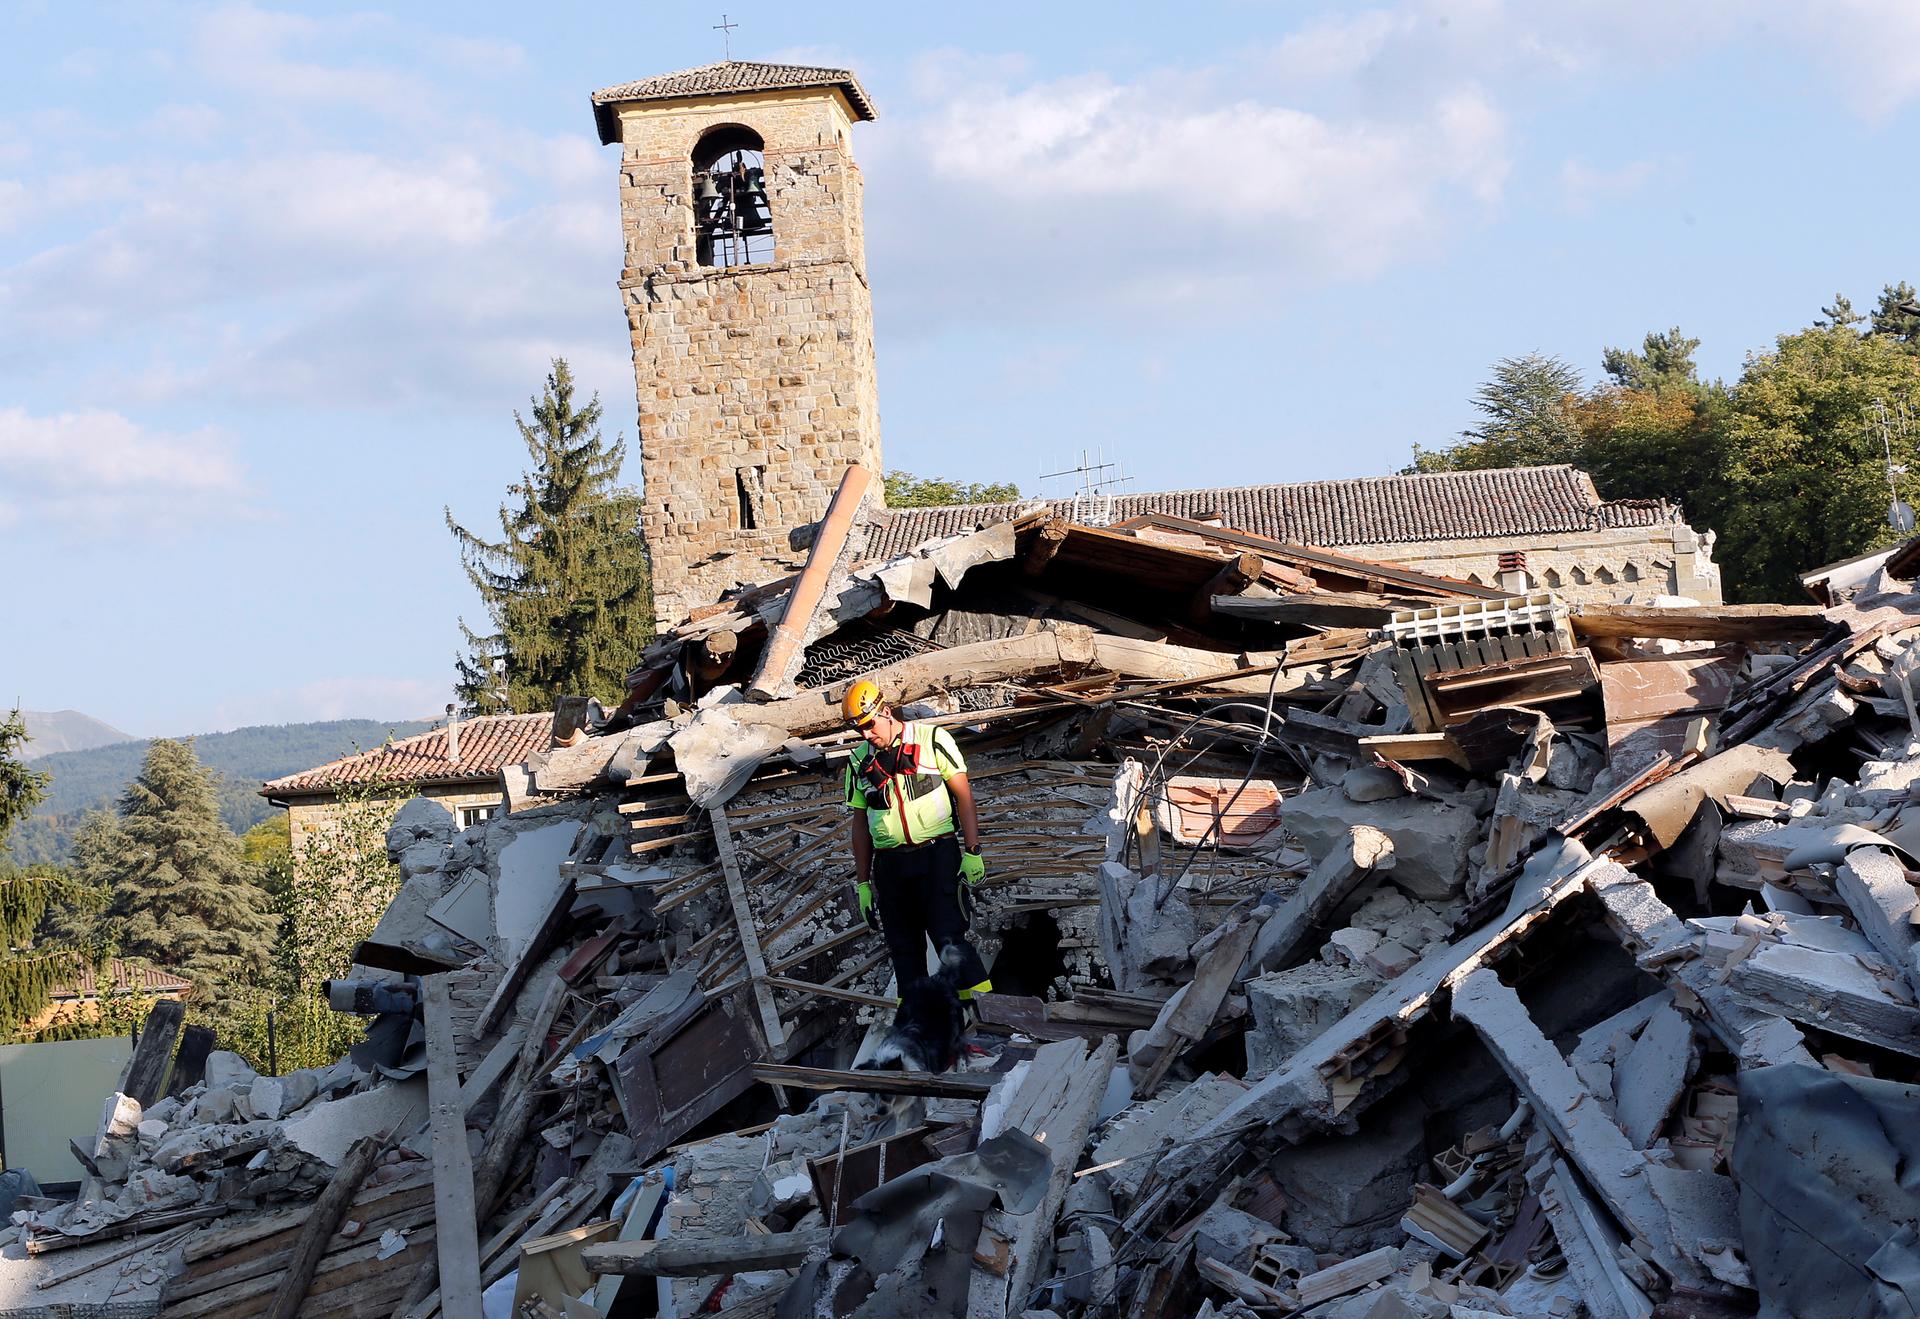 A rescue worker and a dog search among debris following an earthquake in Amatrice, central Italy, August 27, 2016.